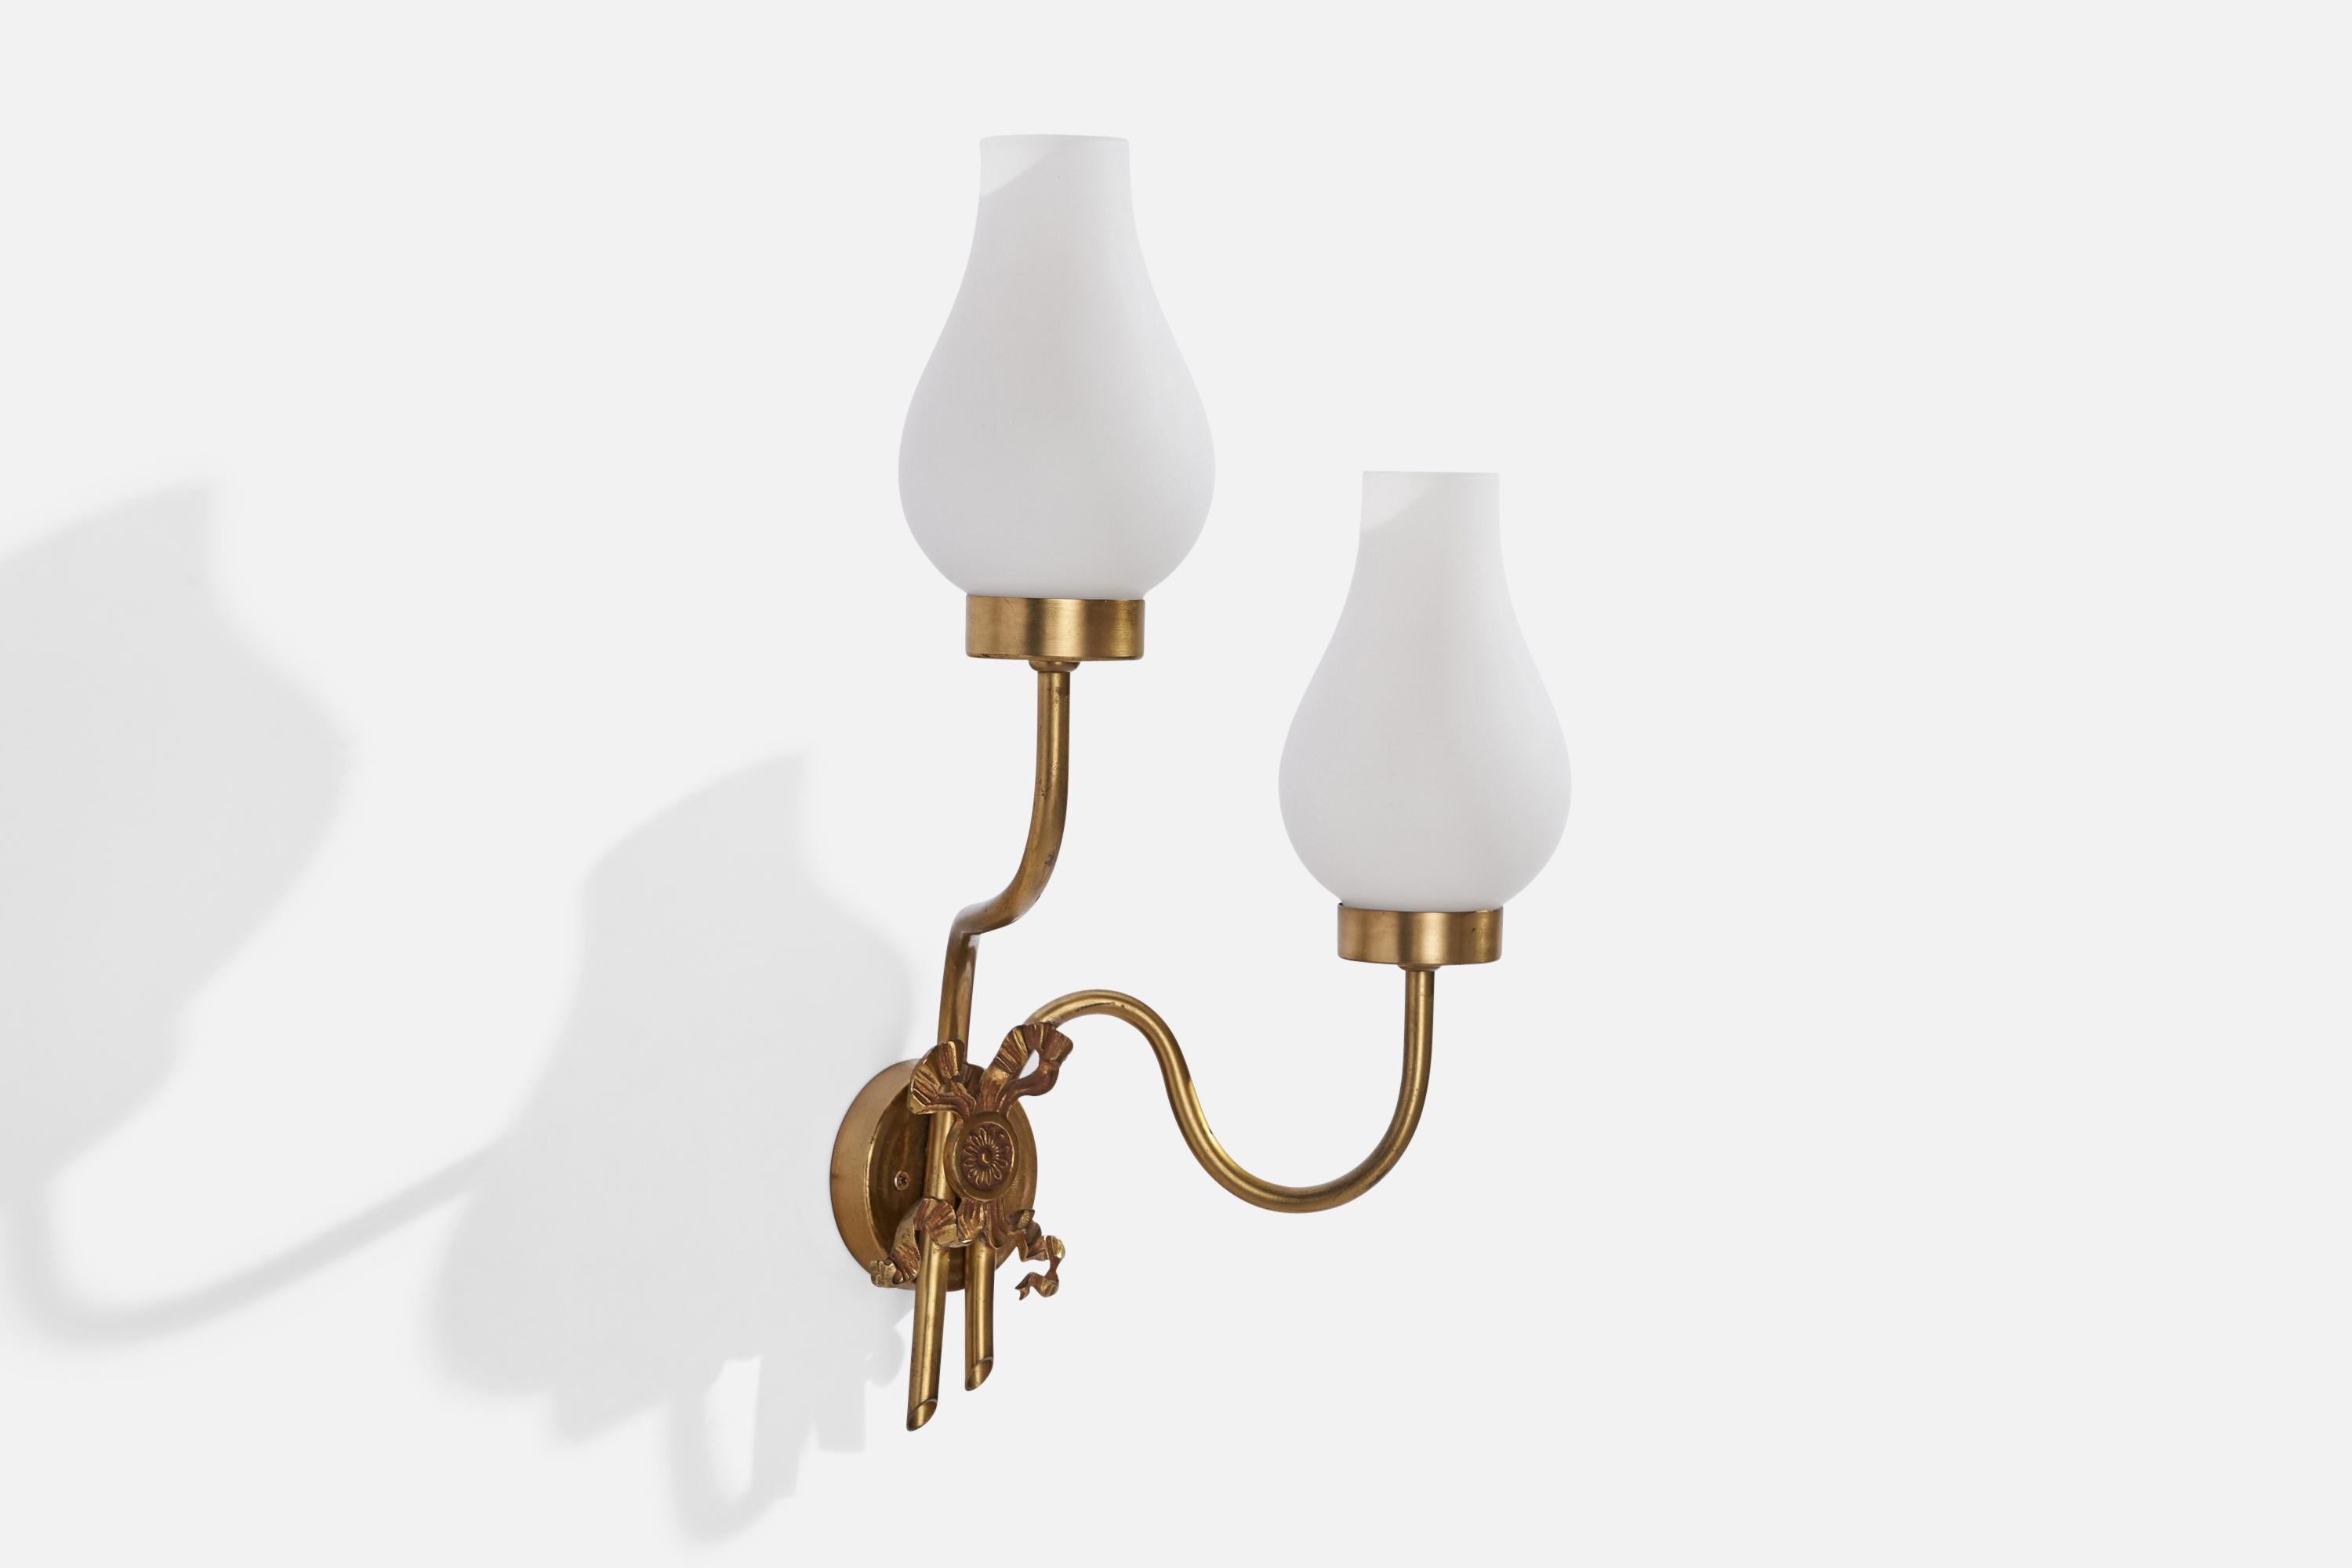 A two-armed brass and white opaline glass wall light designed and produced in Sweden, 1940s.

Overall Dimensions (inches): 15.5” H x 10” W x 6” D
Back Plate Dimensions (inches): 2.78” H x 0.68” D
Bulb Specifications: E-14 Bulb
Number of Sockets: